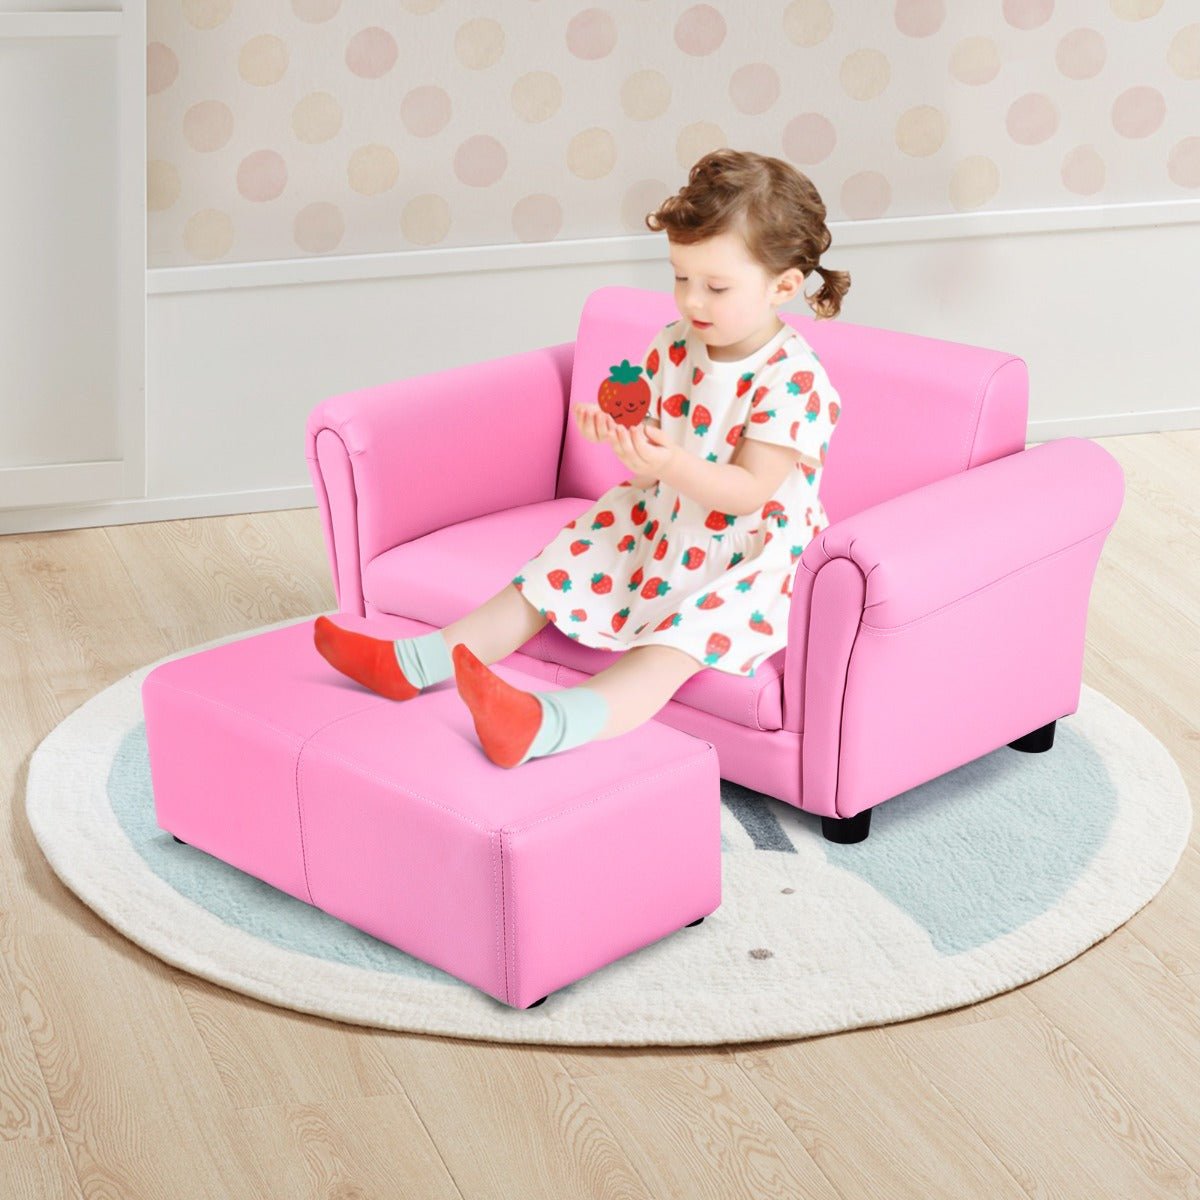 Children's Sofa Set: 2-Seater with Footstool and Solid Wooden Frame for Kids